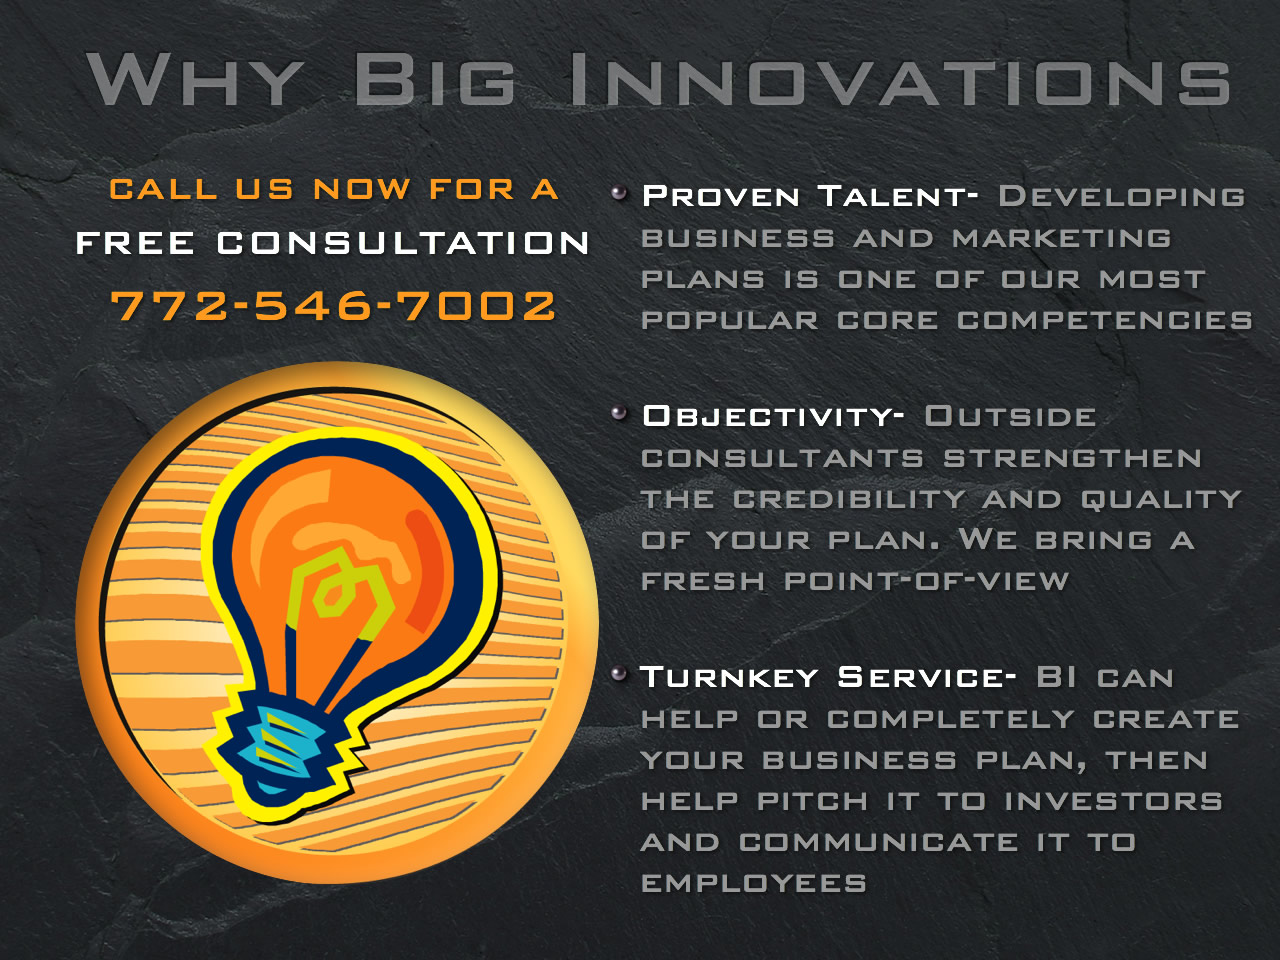 Hire Big Innovations to help you develop the best strategic business plan you've ever had